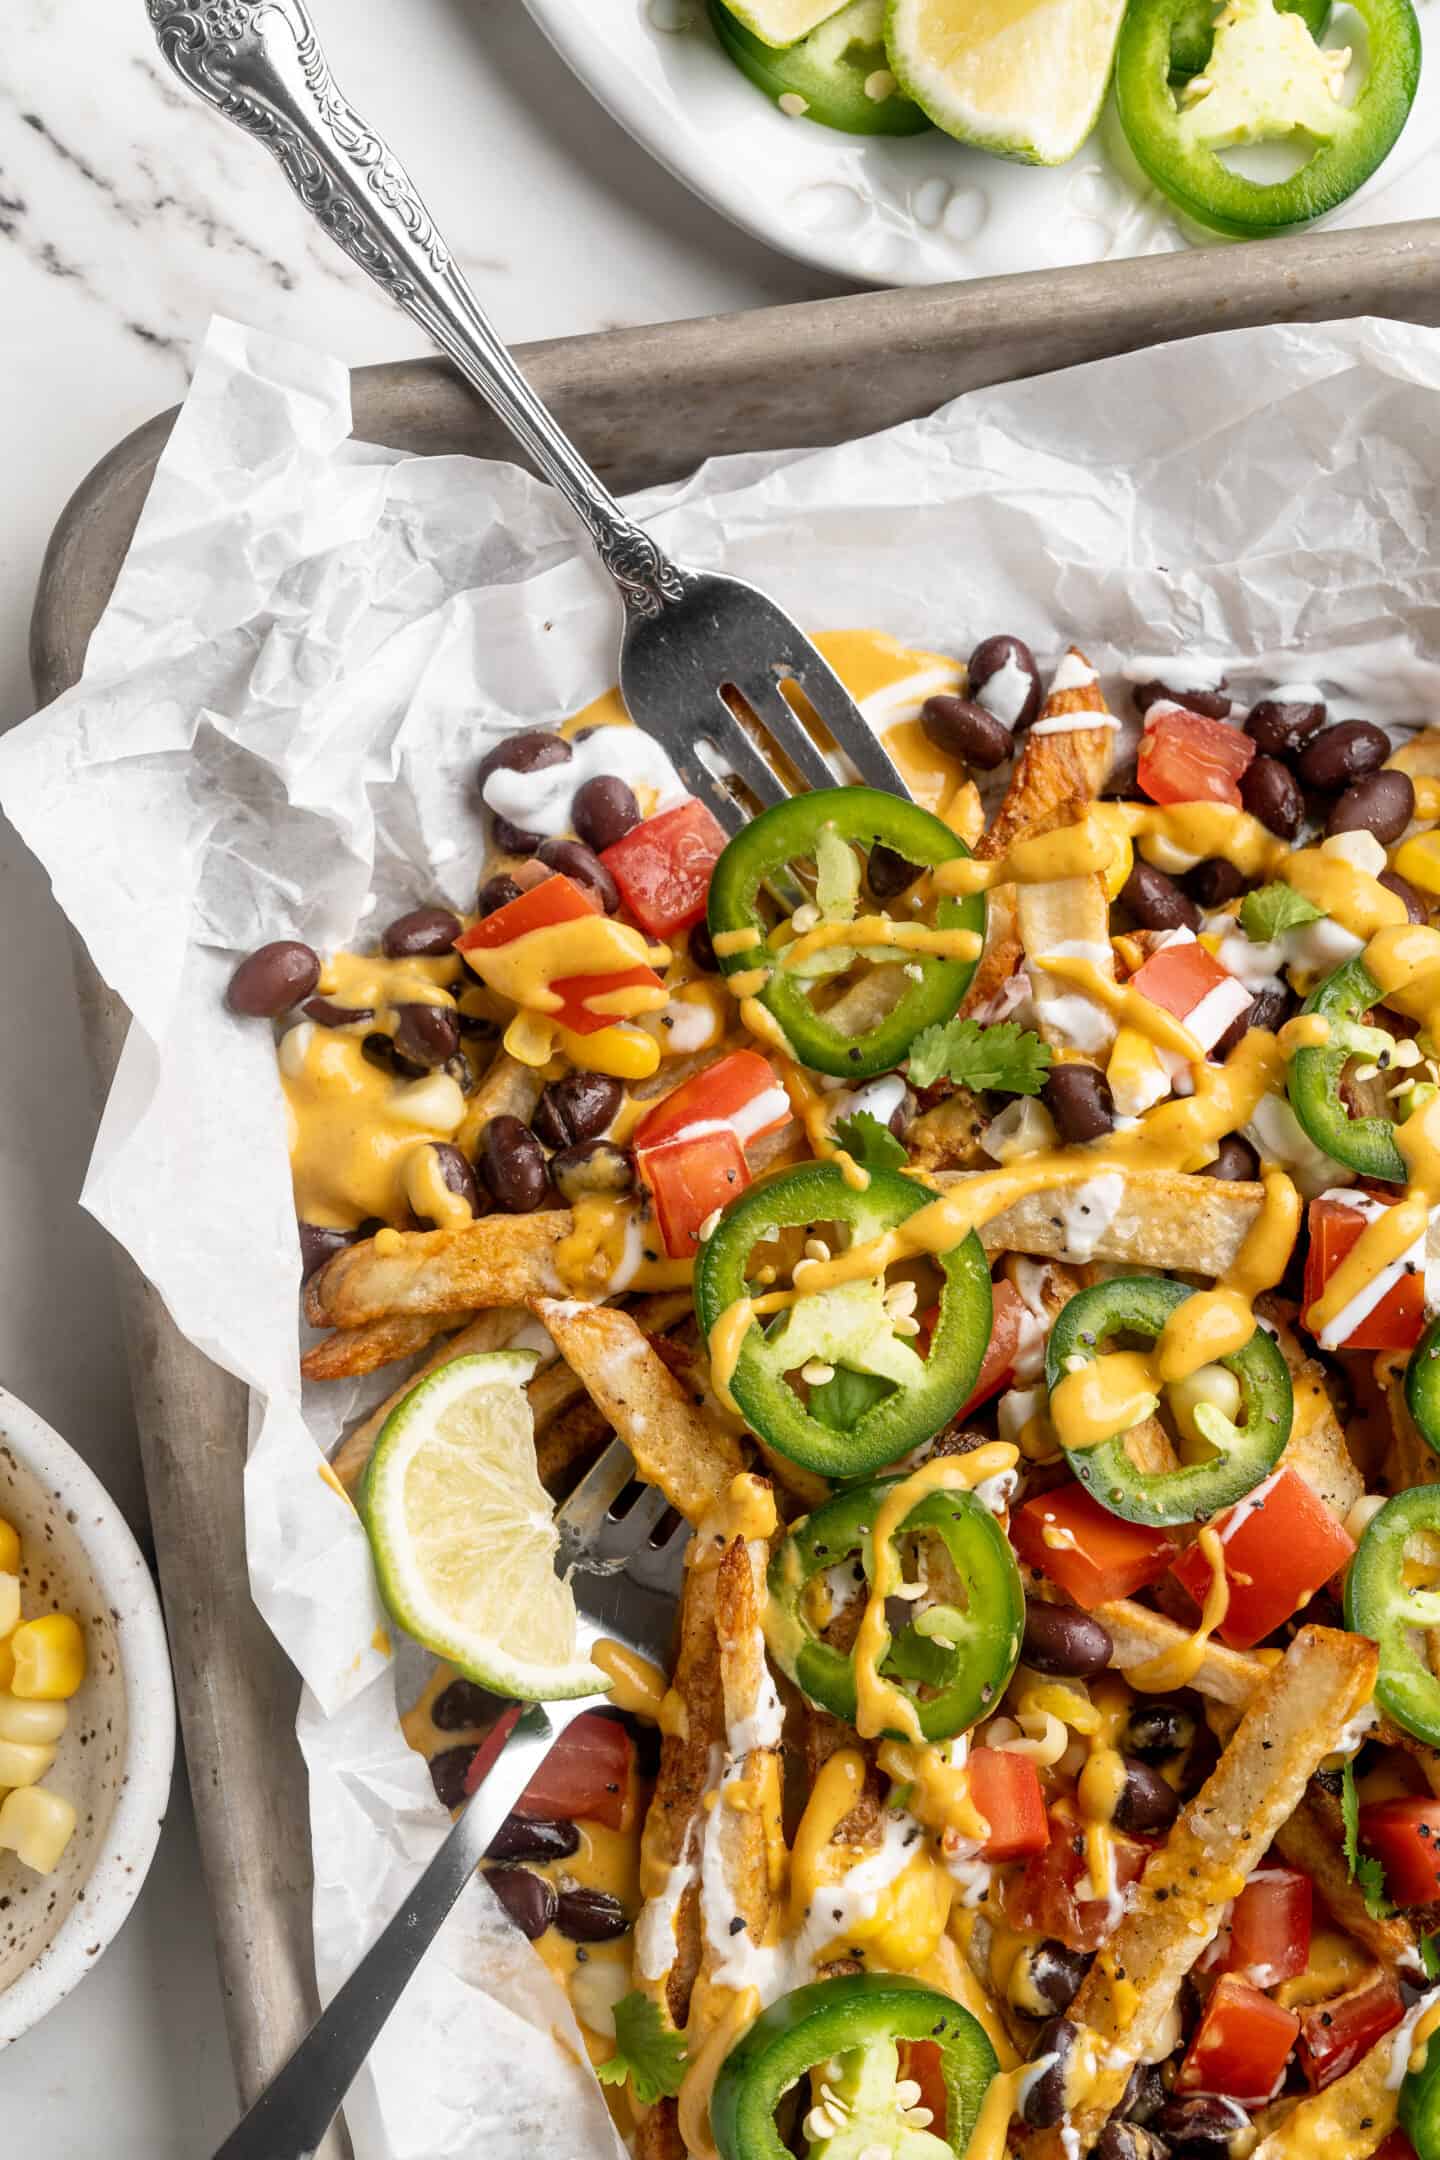 Sheet pan with loaded nacho fries, with forks digging in